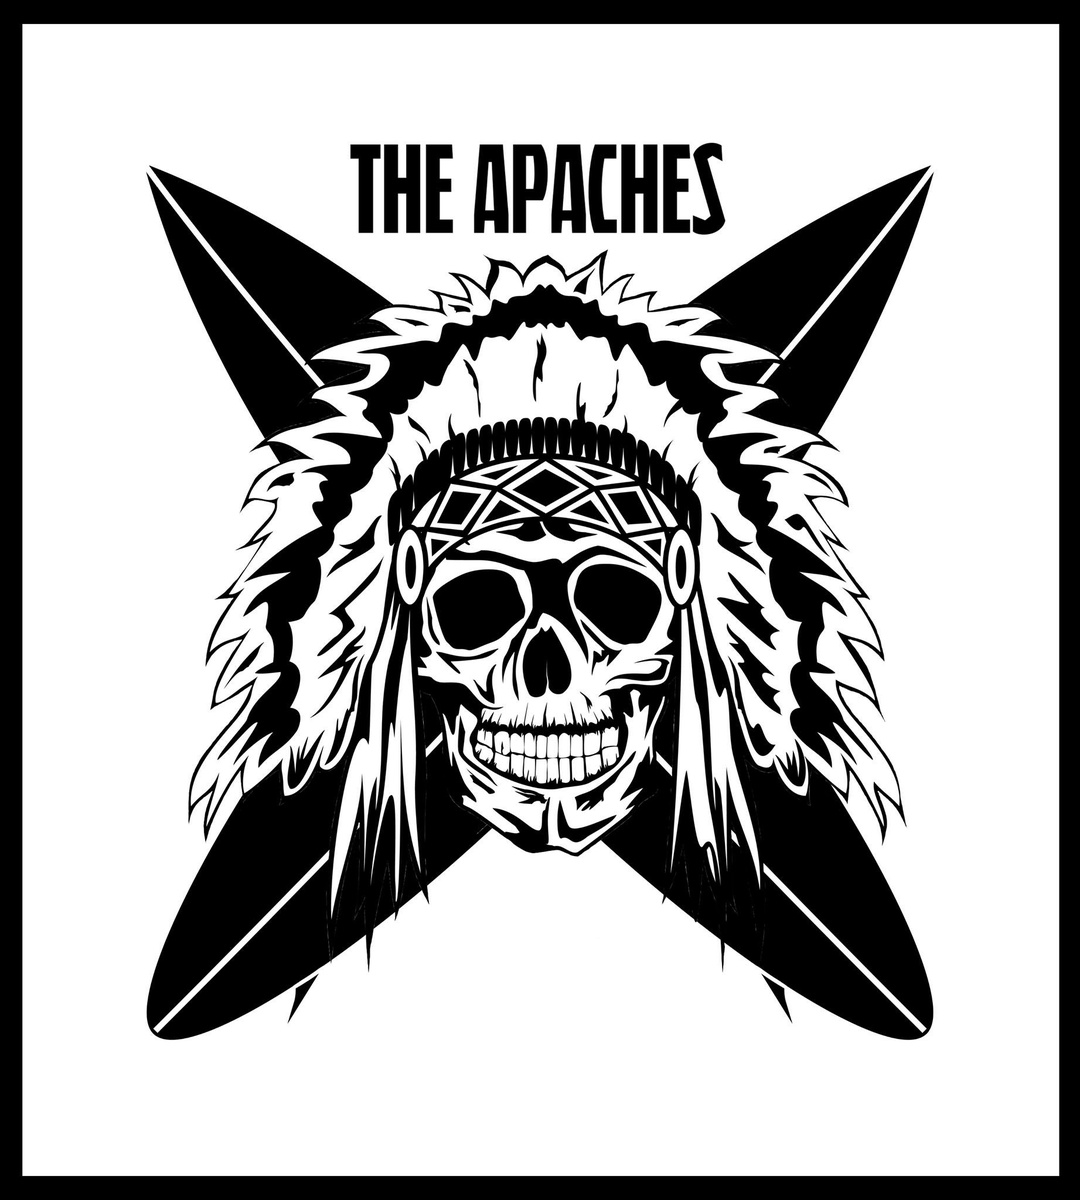 The Apaches - Musica Surfica EP